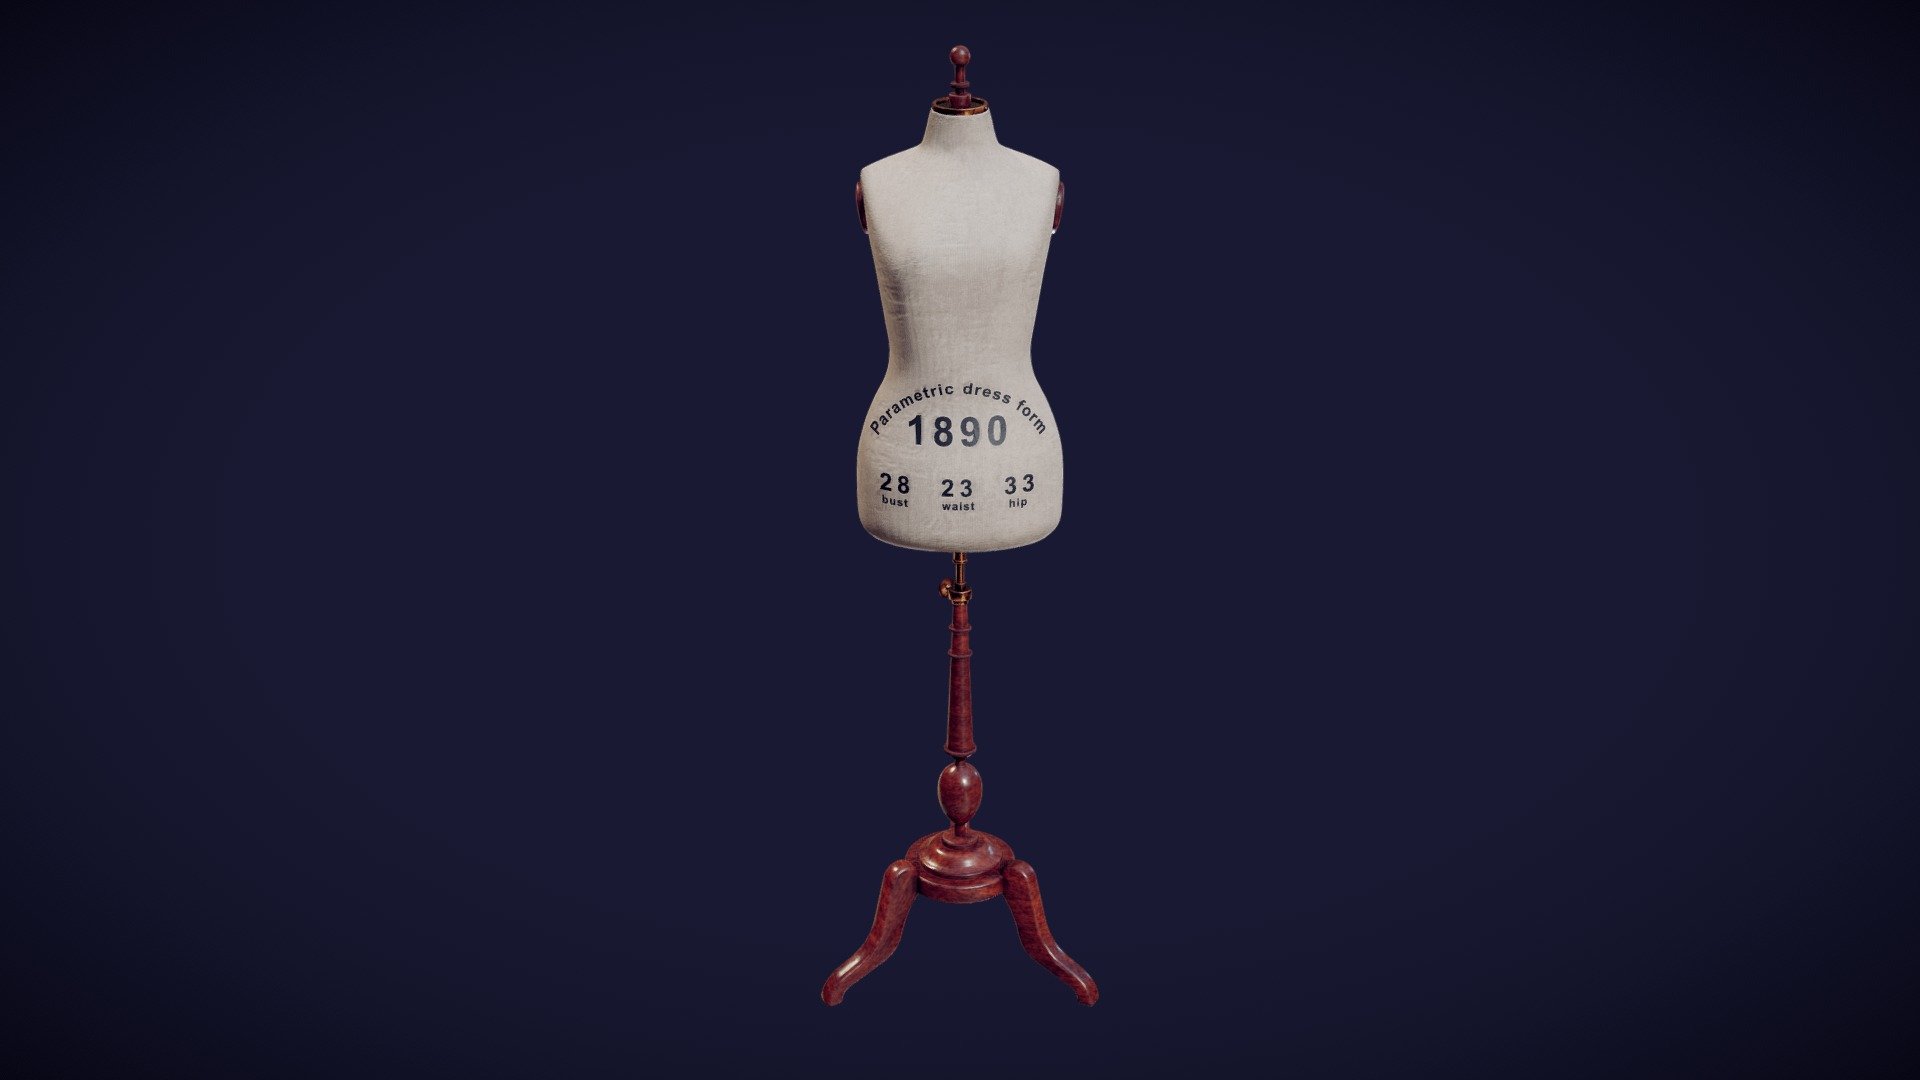 The 3D model presents a historical mannequin (a dress form) dating to 1890. The virtual mannequin was generated automatically by using a new method of parametric modelling (for further details see https://doi.org/10.1108/IJCST-06-2019-0093). The values of body measurements were taken from a sizing table published in “The Cutters Practical Guide to the Cutting of Ladies’ Garments” (V.D.F. Vincent, 1890). The measurements of the mannequin are: bust – 28 inches; waist – 23 inches; hip – 33 inches. The authors of the 3D model are

Aleksei Moskvin https://independent.academia.edu/AlekseiMoskvin

Mariia Moskvina https://independent.academia.edu/MariiaMoskvina

(Saint Petersburg State University of Industrial Technologies and Design)

DOI: http://dx.doi.org/10.13140/RG.2.2.22974.41287
https://www.researchgate.net/publication/357168392_1890_dress_form_size_28

The authors thank scientists from Ivanovo State Polytechnic University for providing information on historical mannequins 3d model